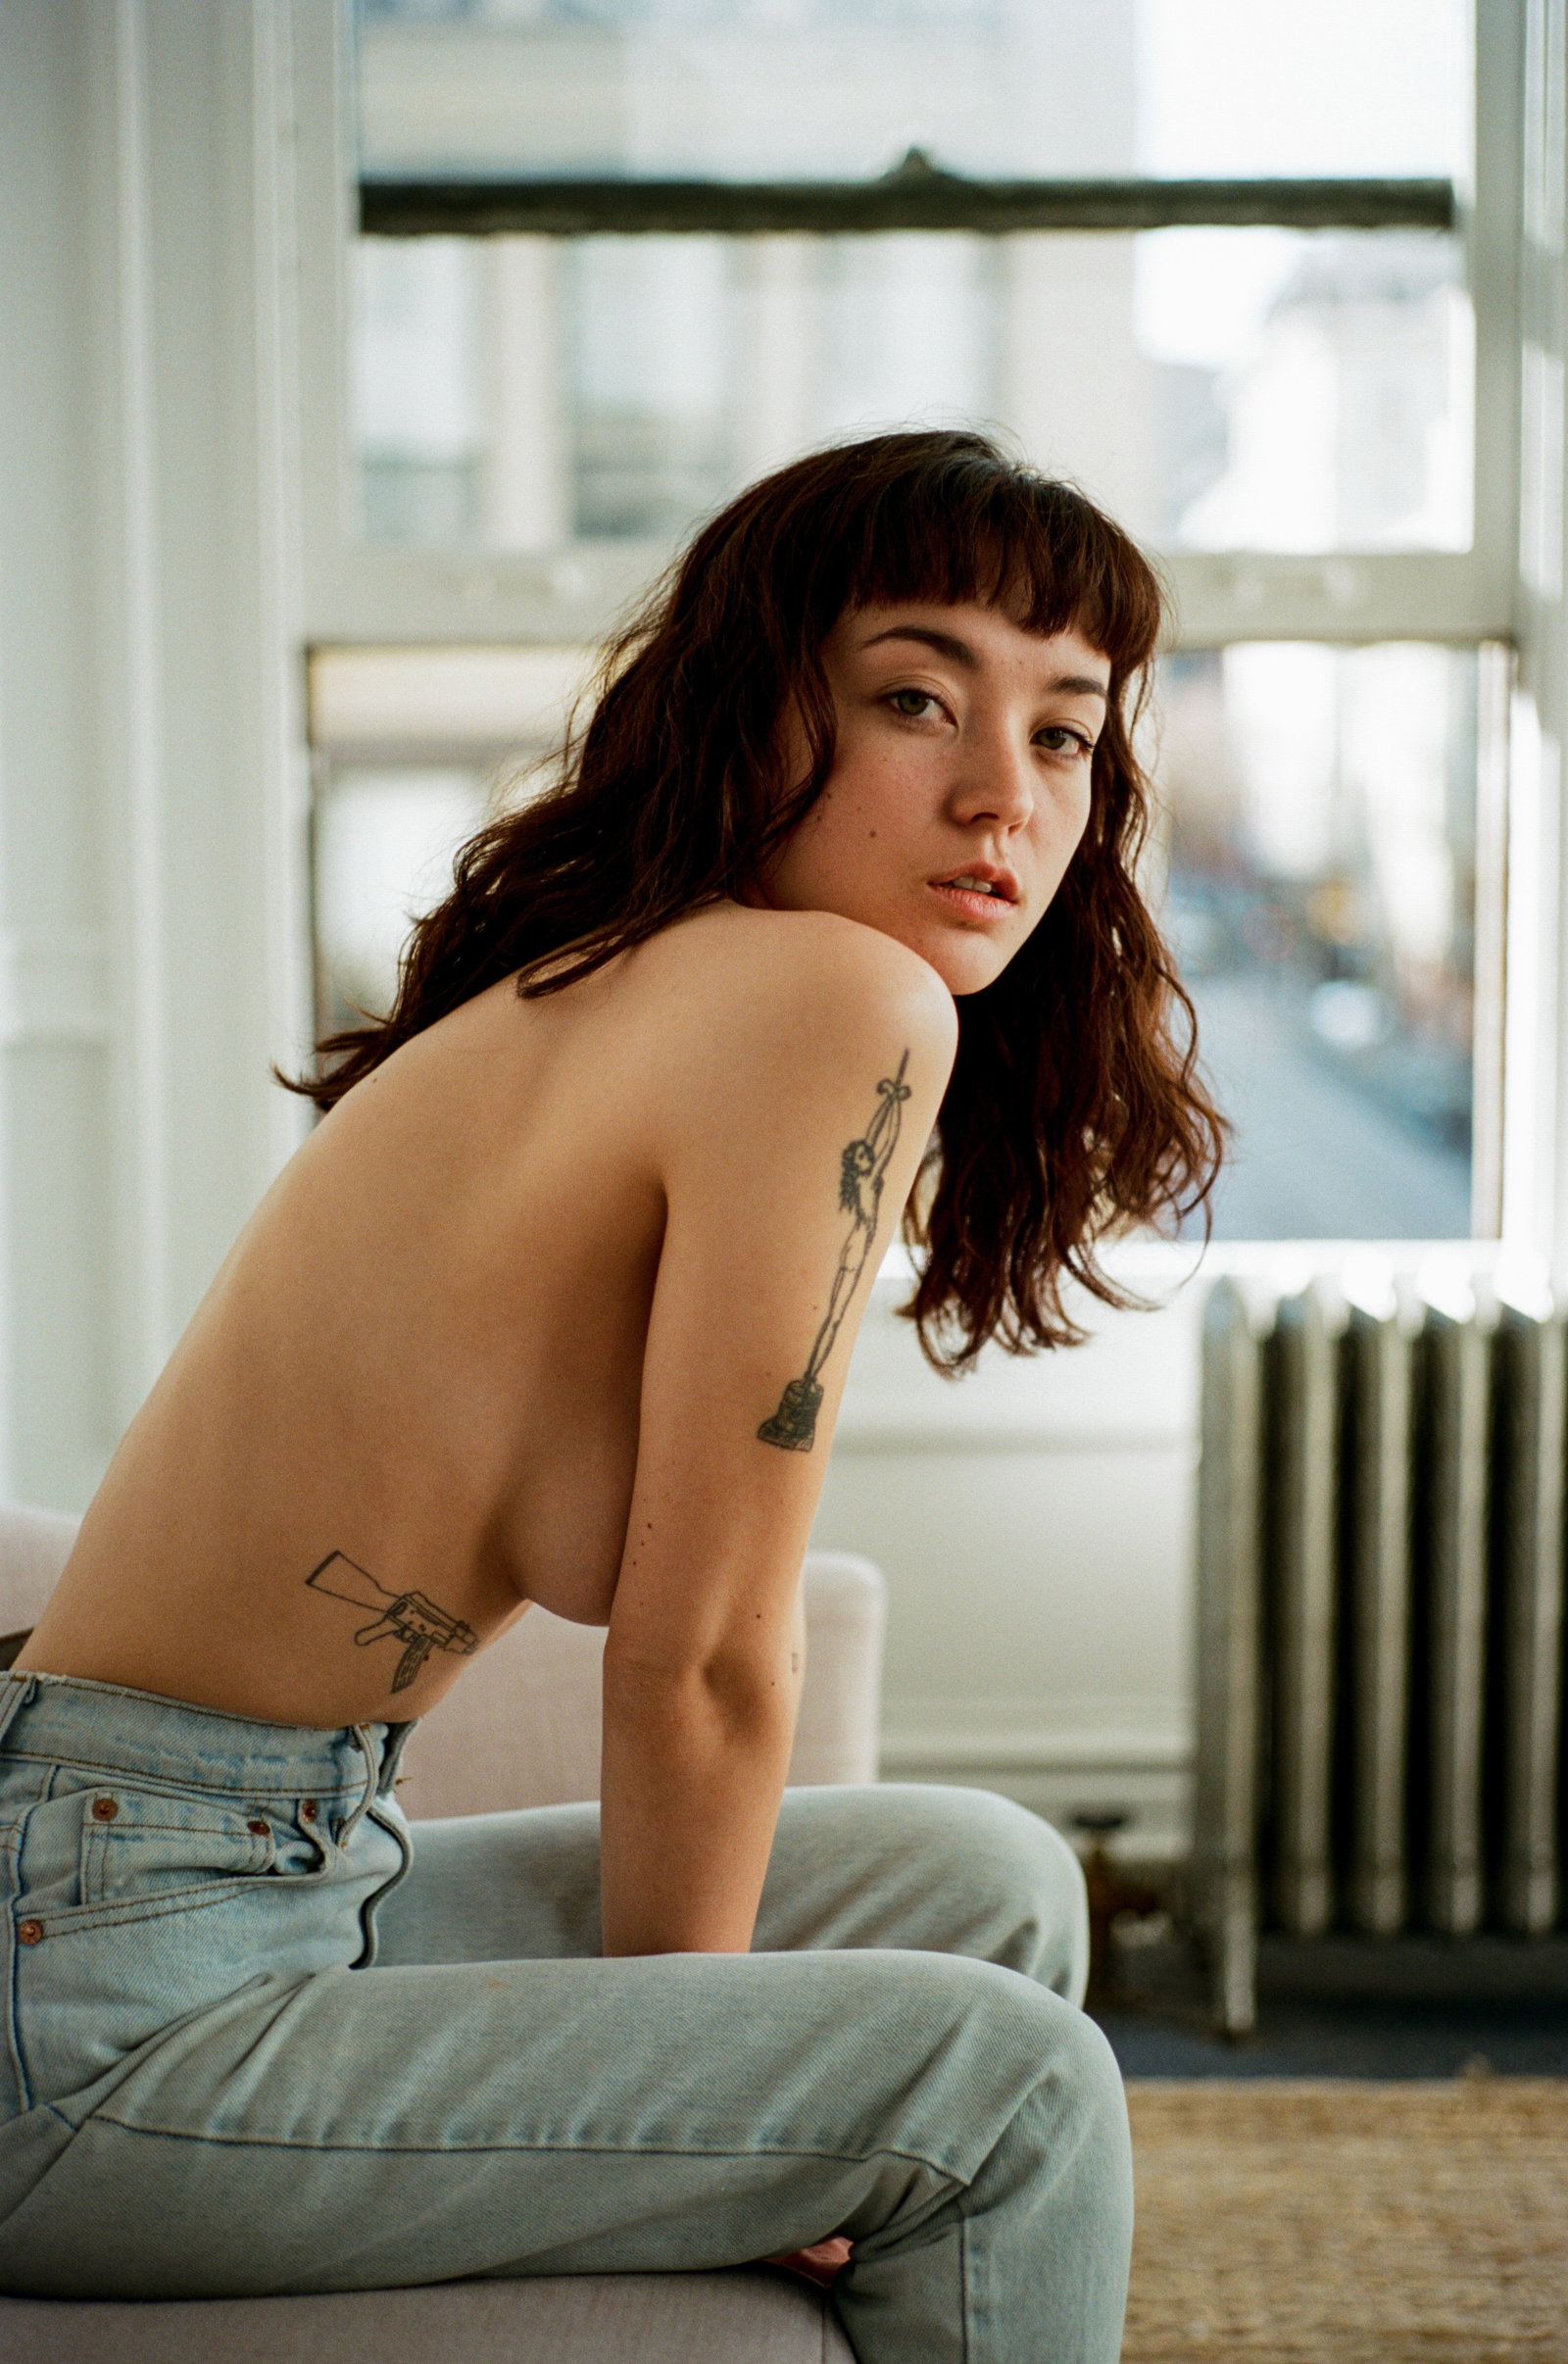 Photo by PureForm with the username @PureForm,  March 3, 2018 at 5:09 AM and the text says 'junoltk:

photo by Brock Sanders #juno  #ltk  #brock  #sanders  #shotwithfilm  #35mm  #topless  #tattoos  #jeans'